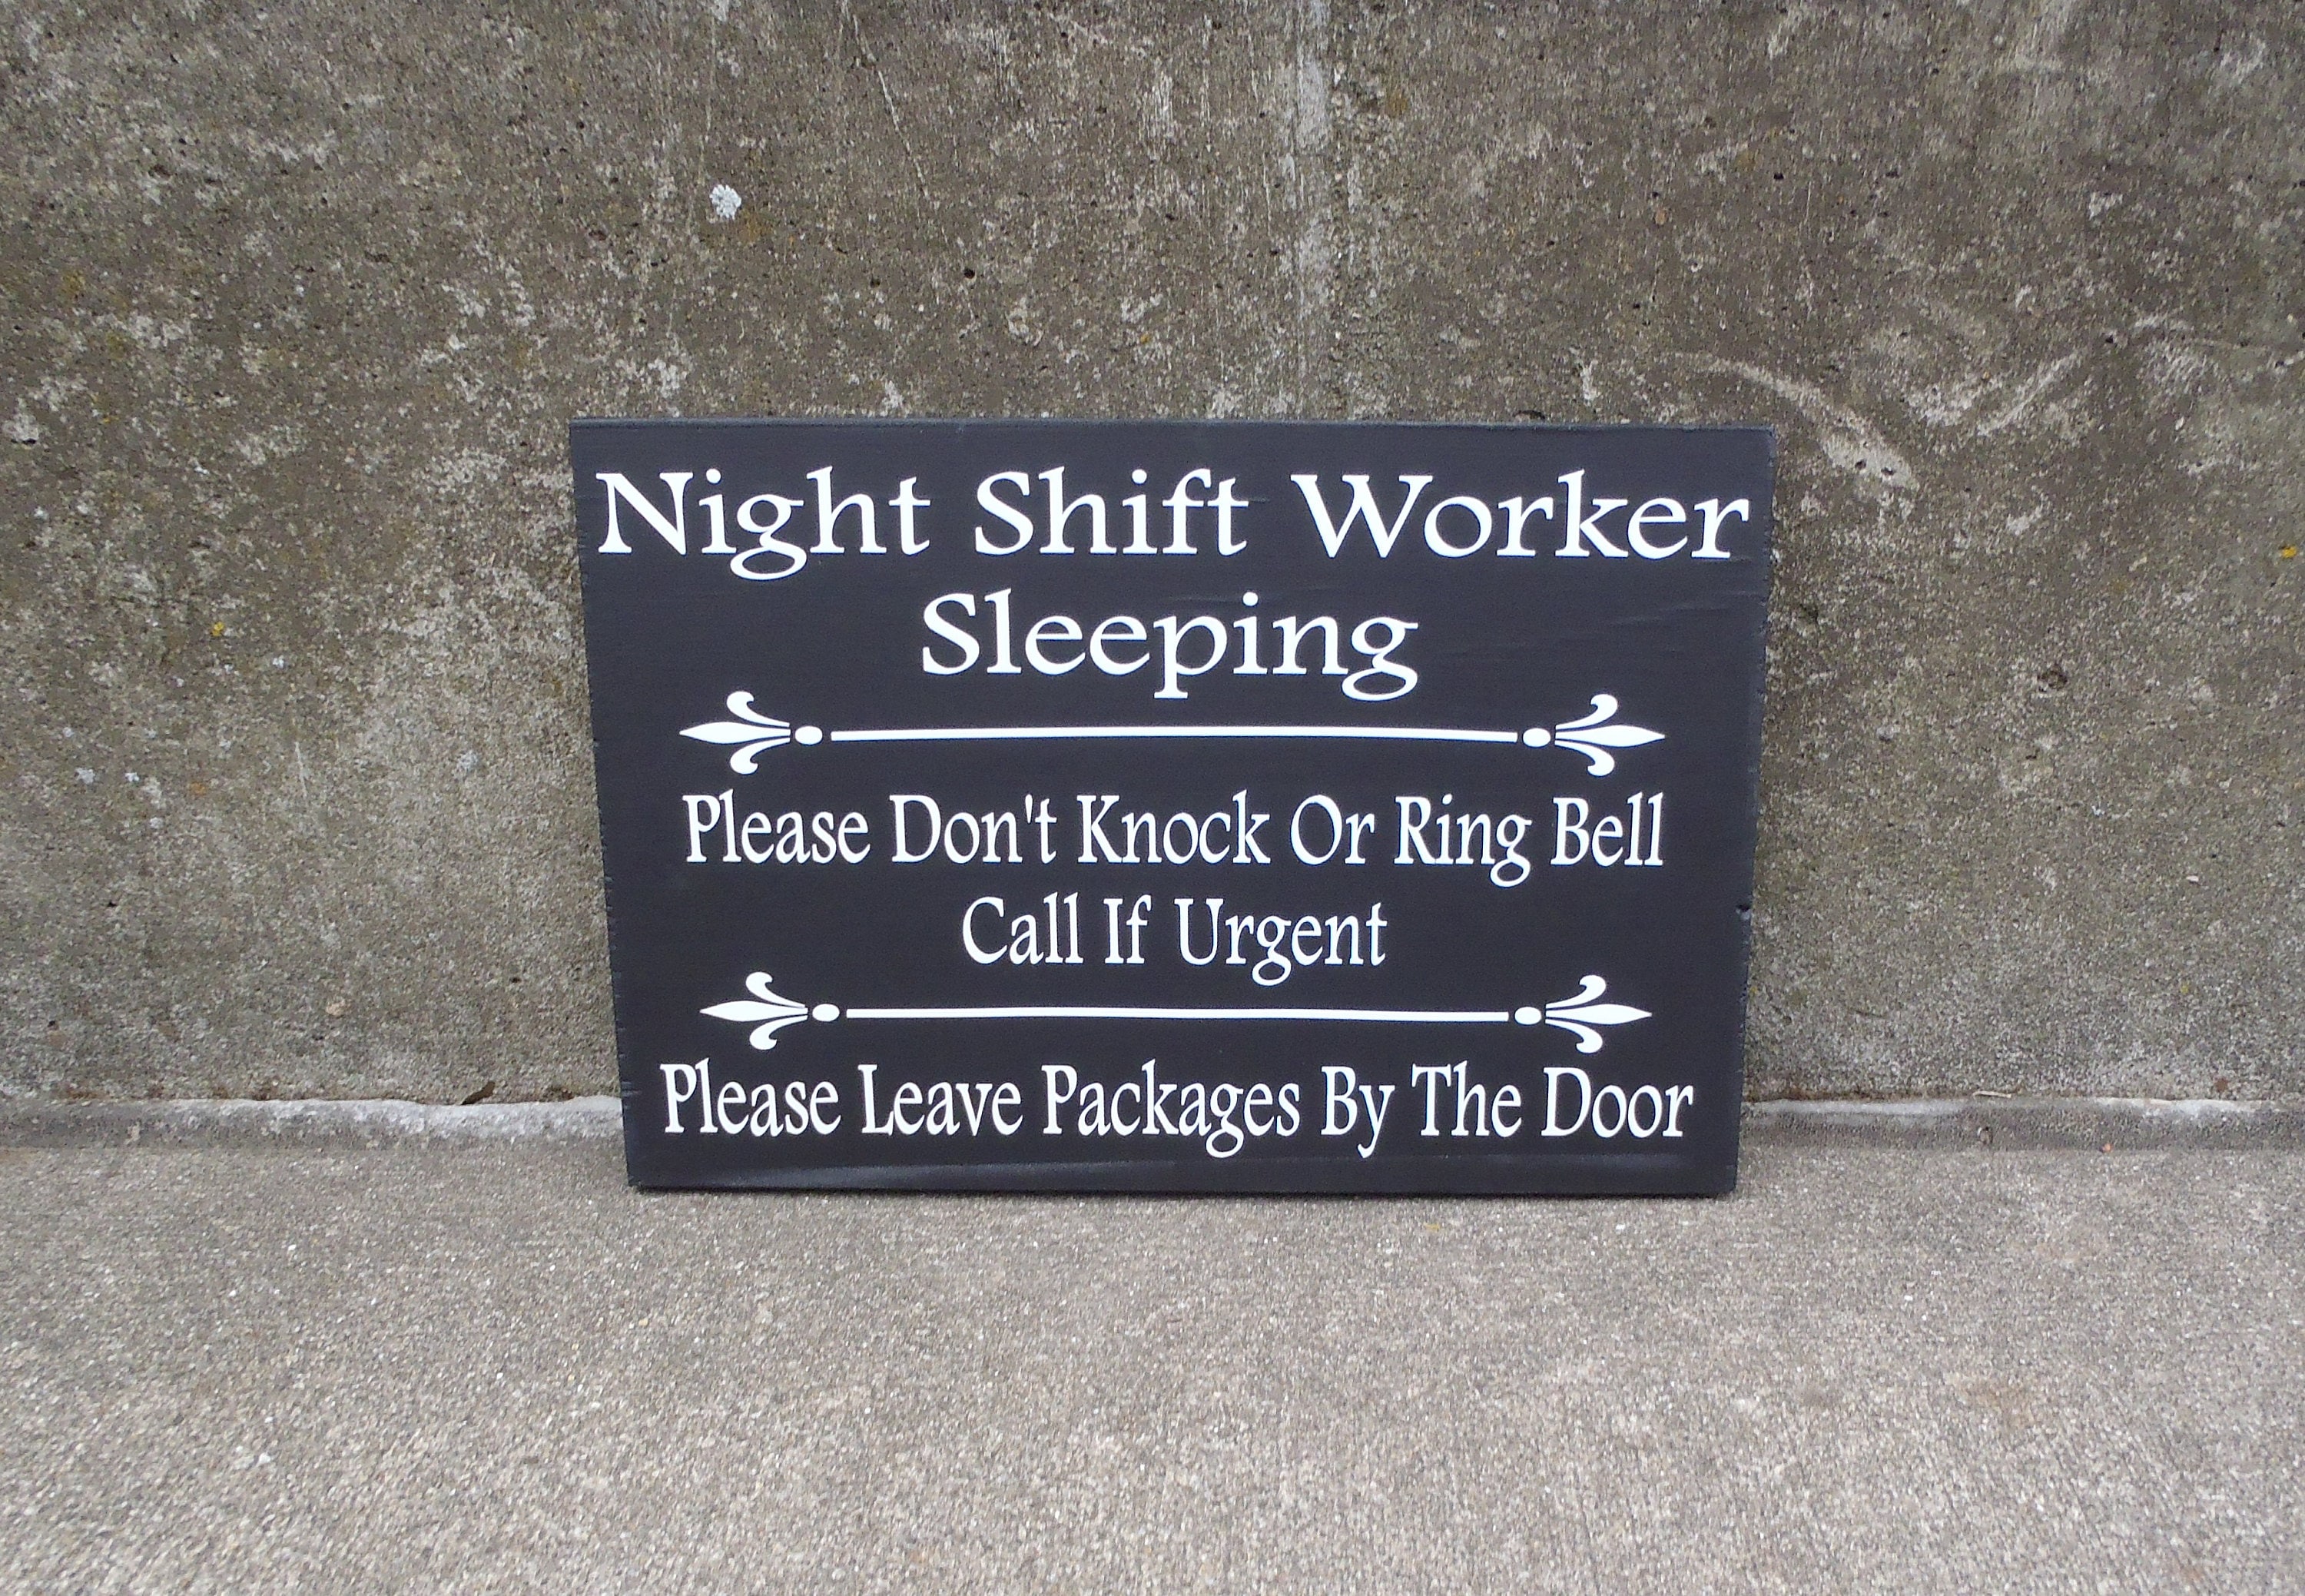 Do you work the night shift? Tell us about it. - Marketplace